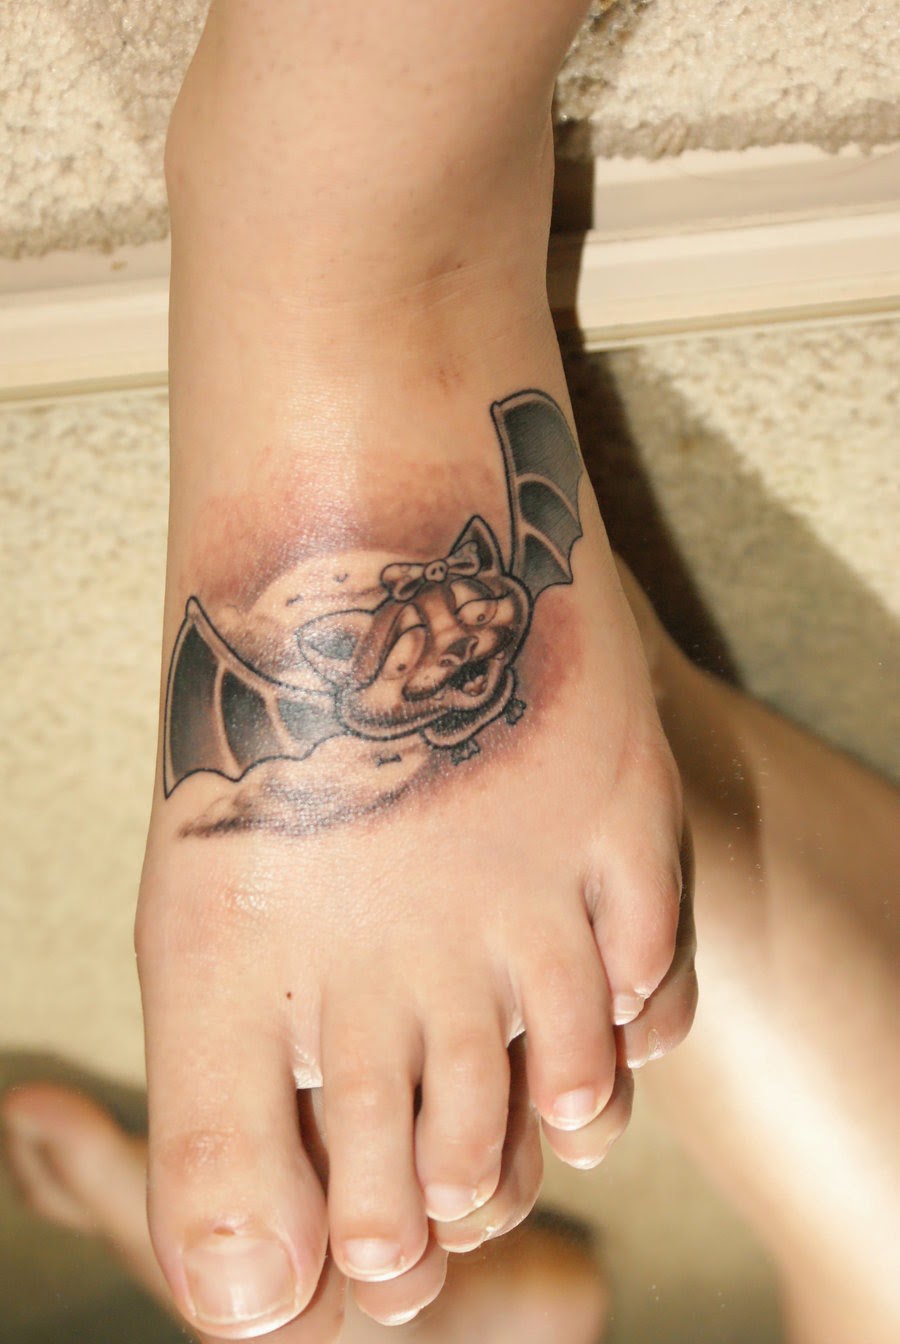 Black Smiling Flying Bat Tattoo On Foot By Oui Je Comprends